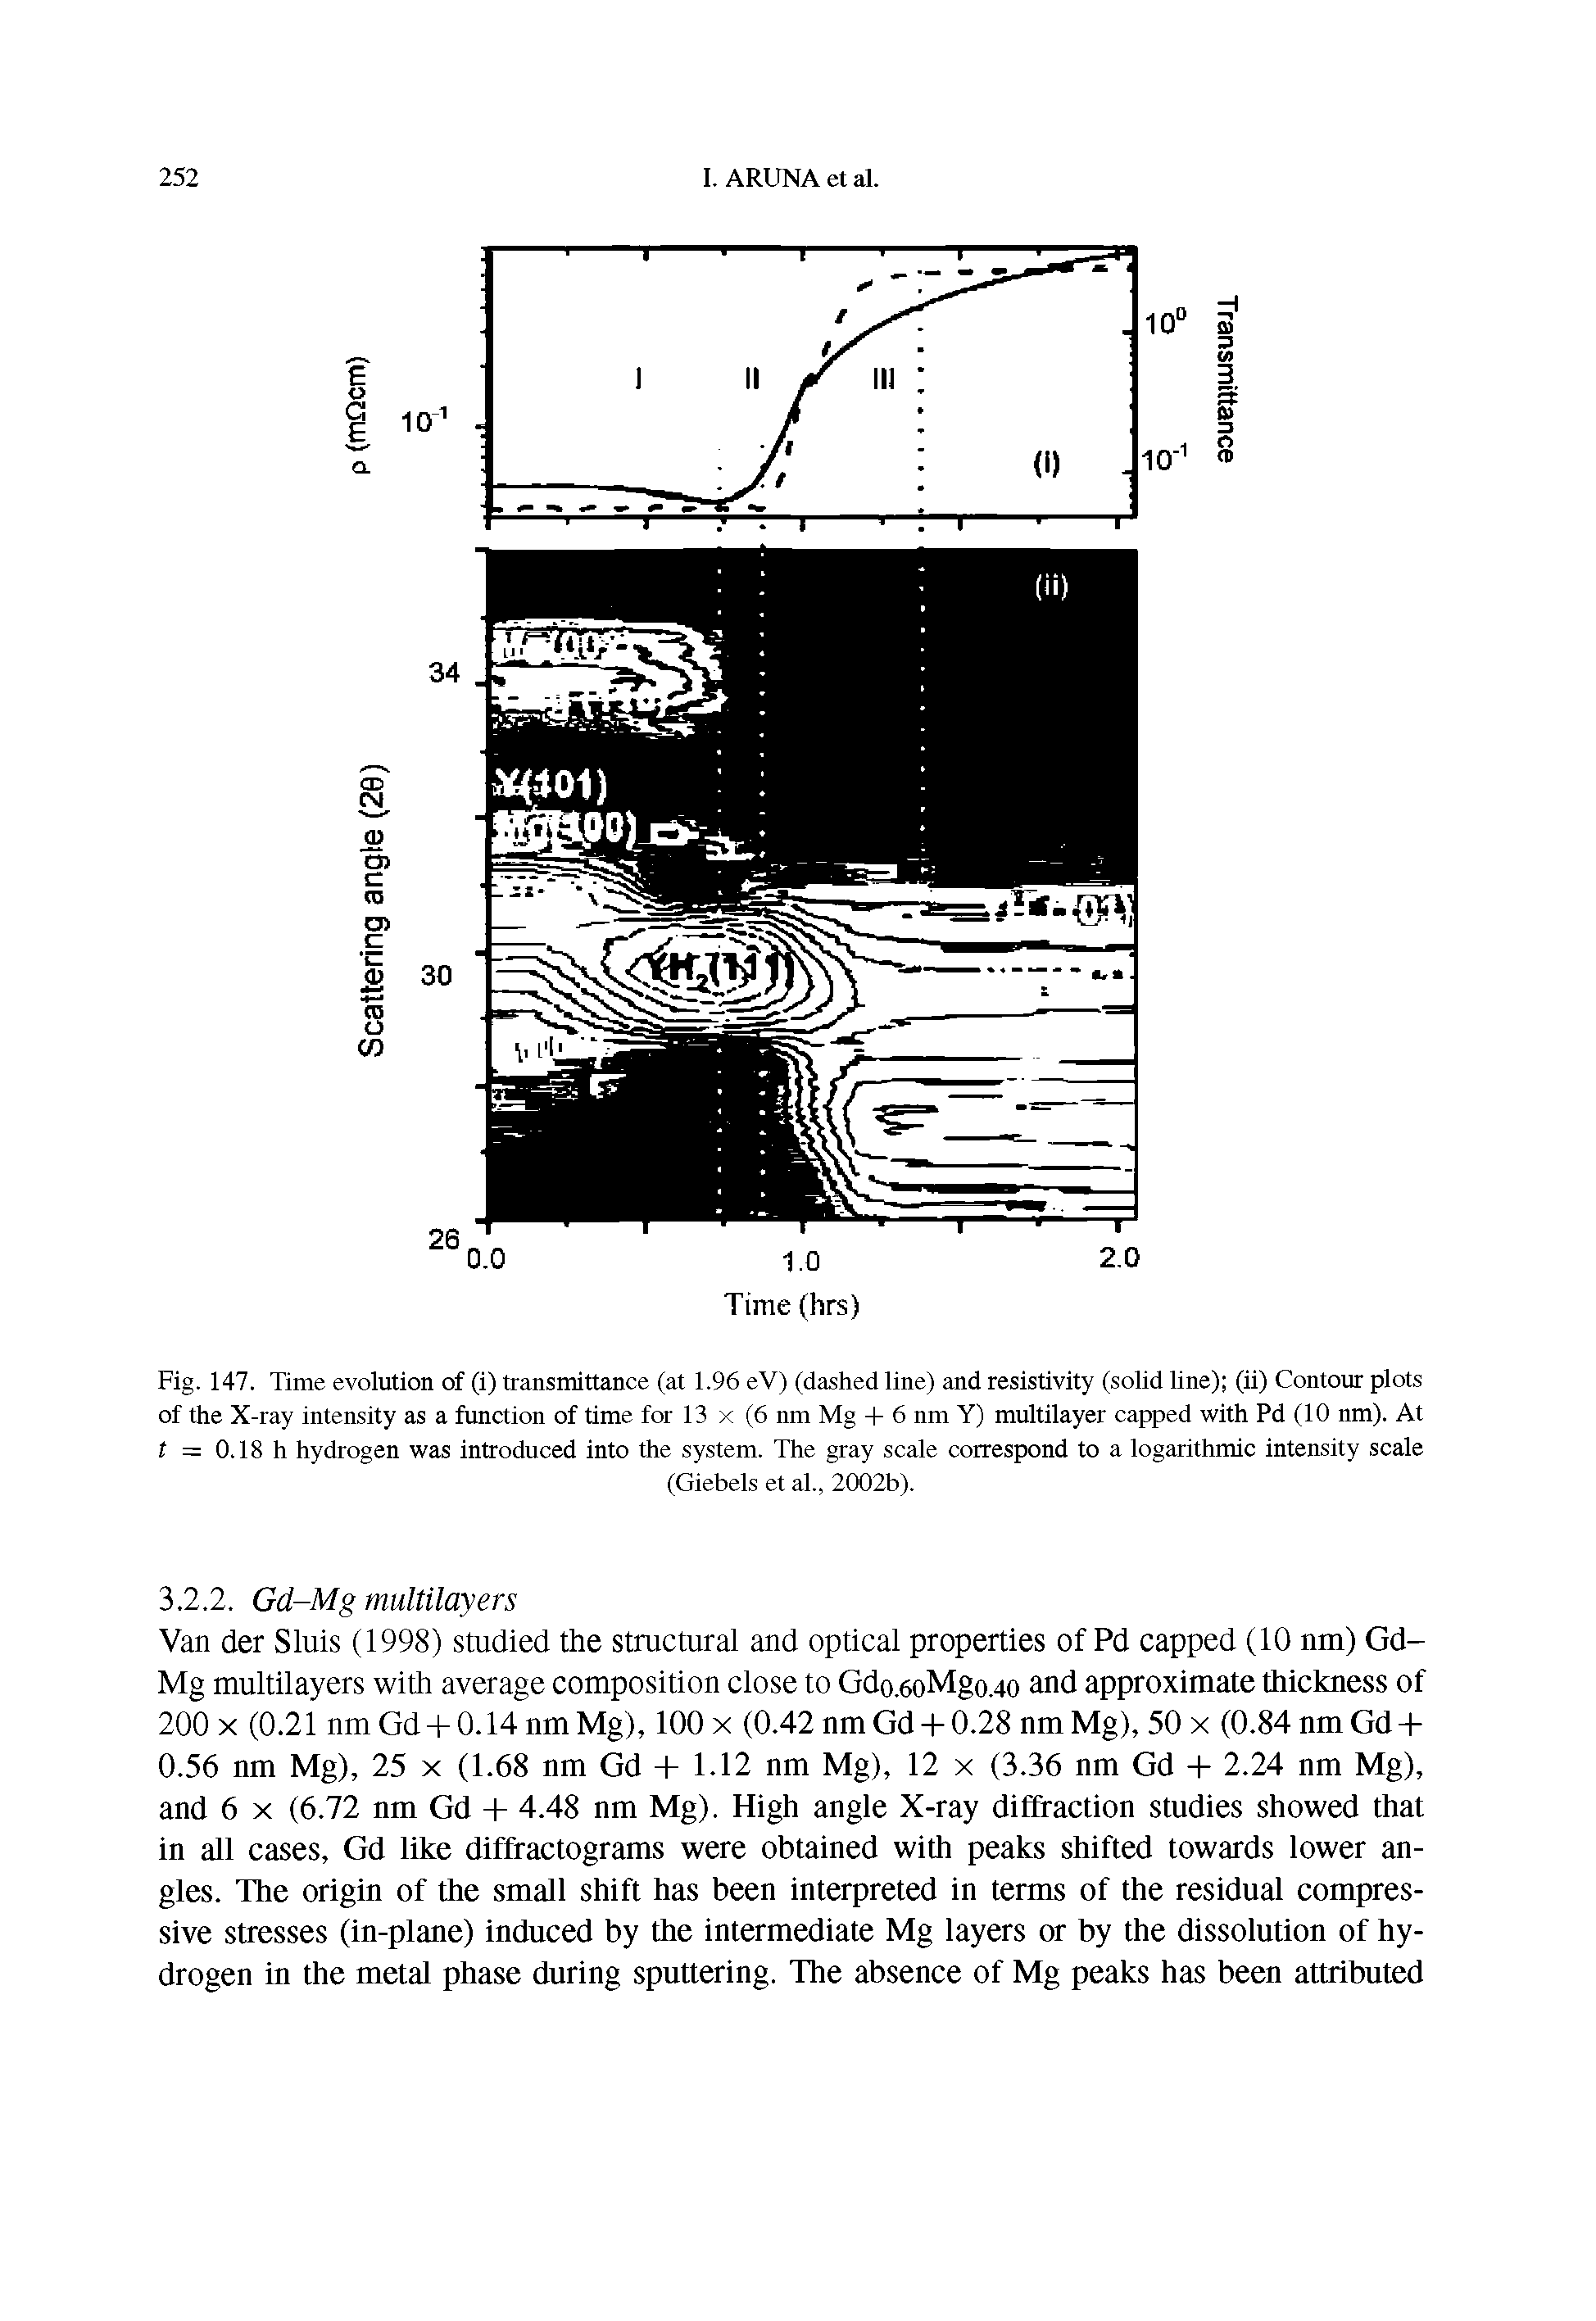 Fig. 147. Time evolution of (i) transmittance (at 1.96 eV) (dashed line) and resistivity (soUd Une) (ii) Contour plots of the X-ray intensity as a function of time for 13 x (6 nm Mg -I- 6 nm Y) multilayer capped with Pd (10 nm). At t = 0.18 h hydrogen was introduced into the system. The gray scale correspond to a logarithmic intensity scale...